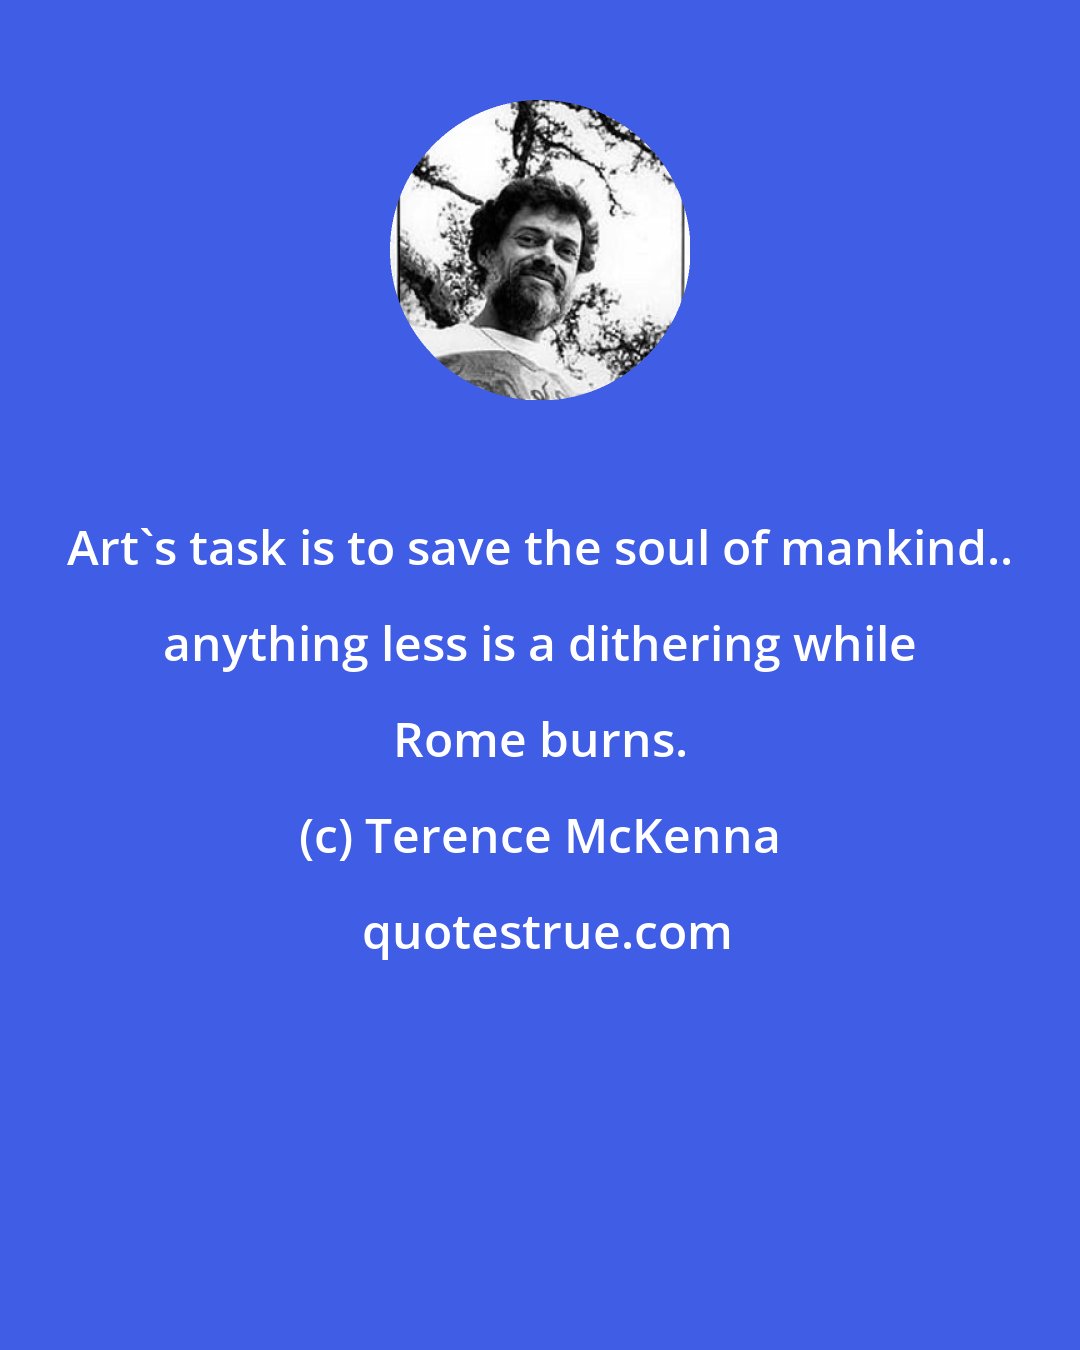 Terence McKenna: Art's task is to save the soul of mankind.. anything less is a dithering while Rome burns.